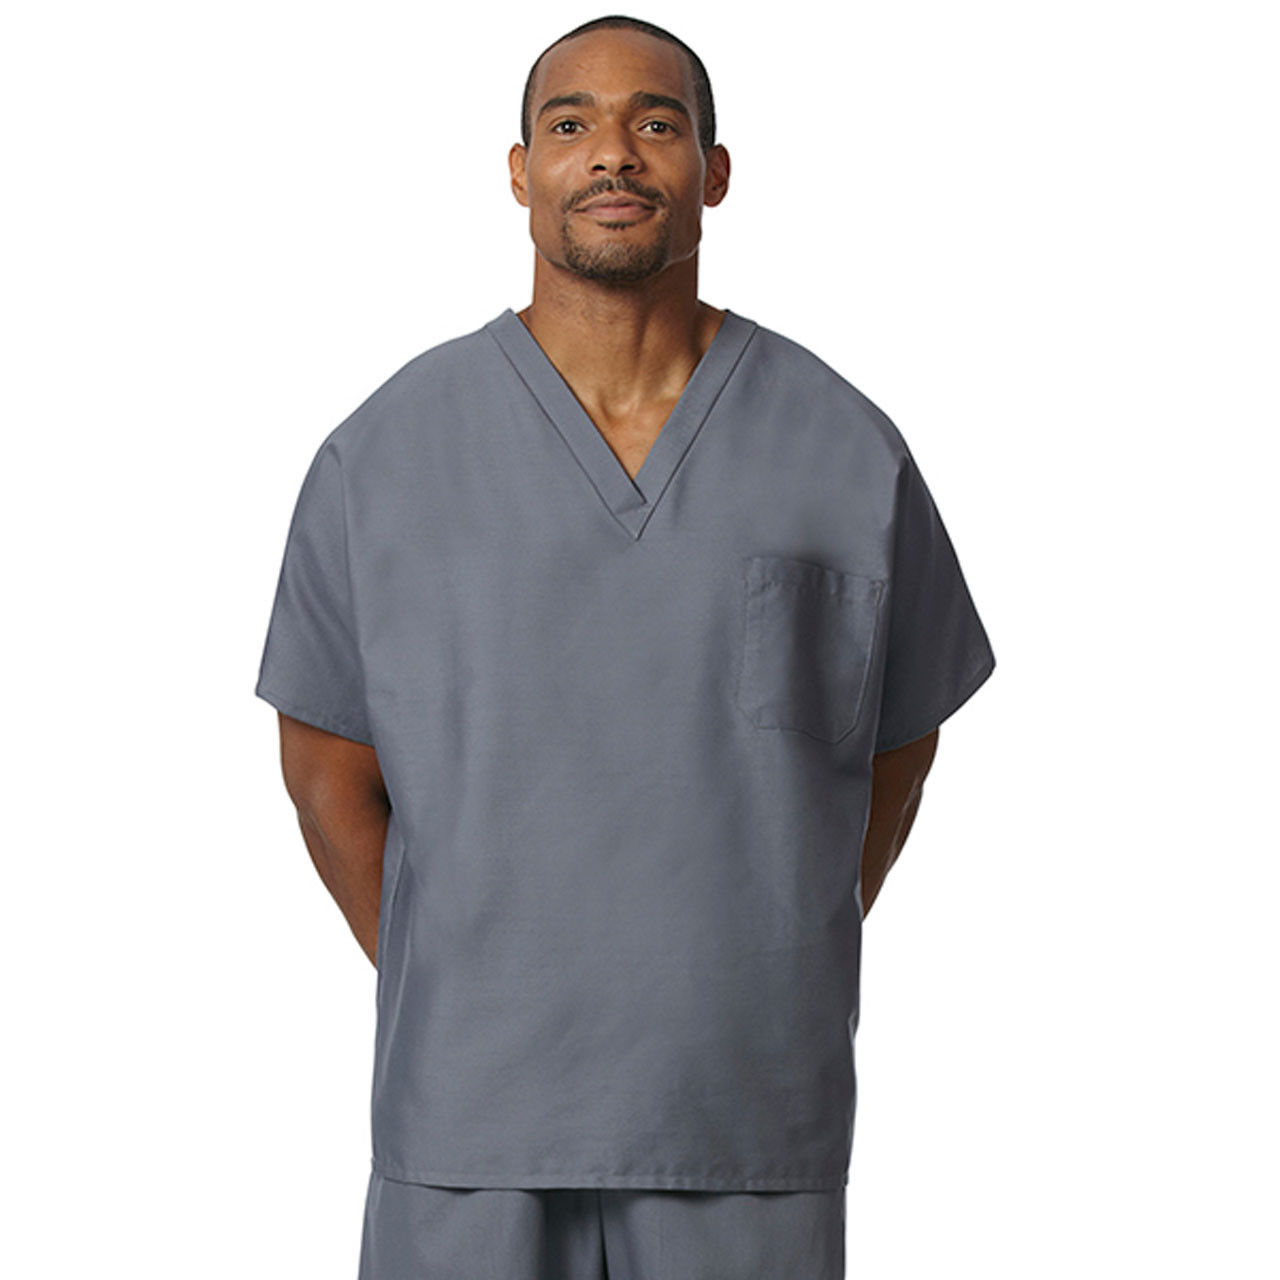 What material are the Gray Scrub Tops made of?